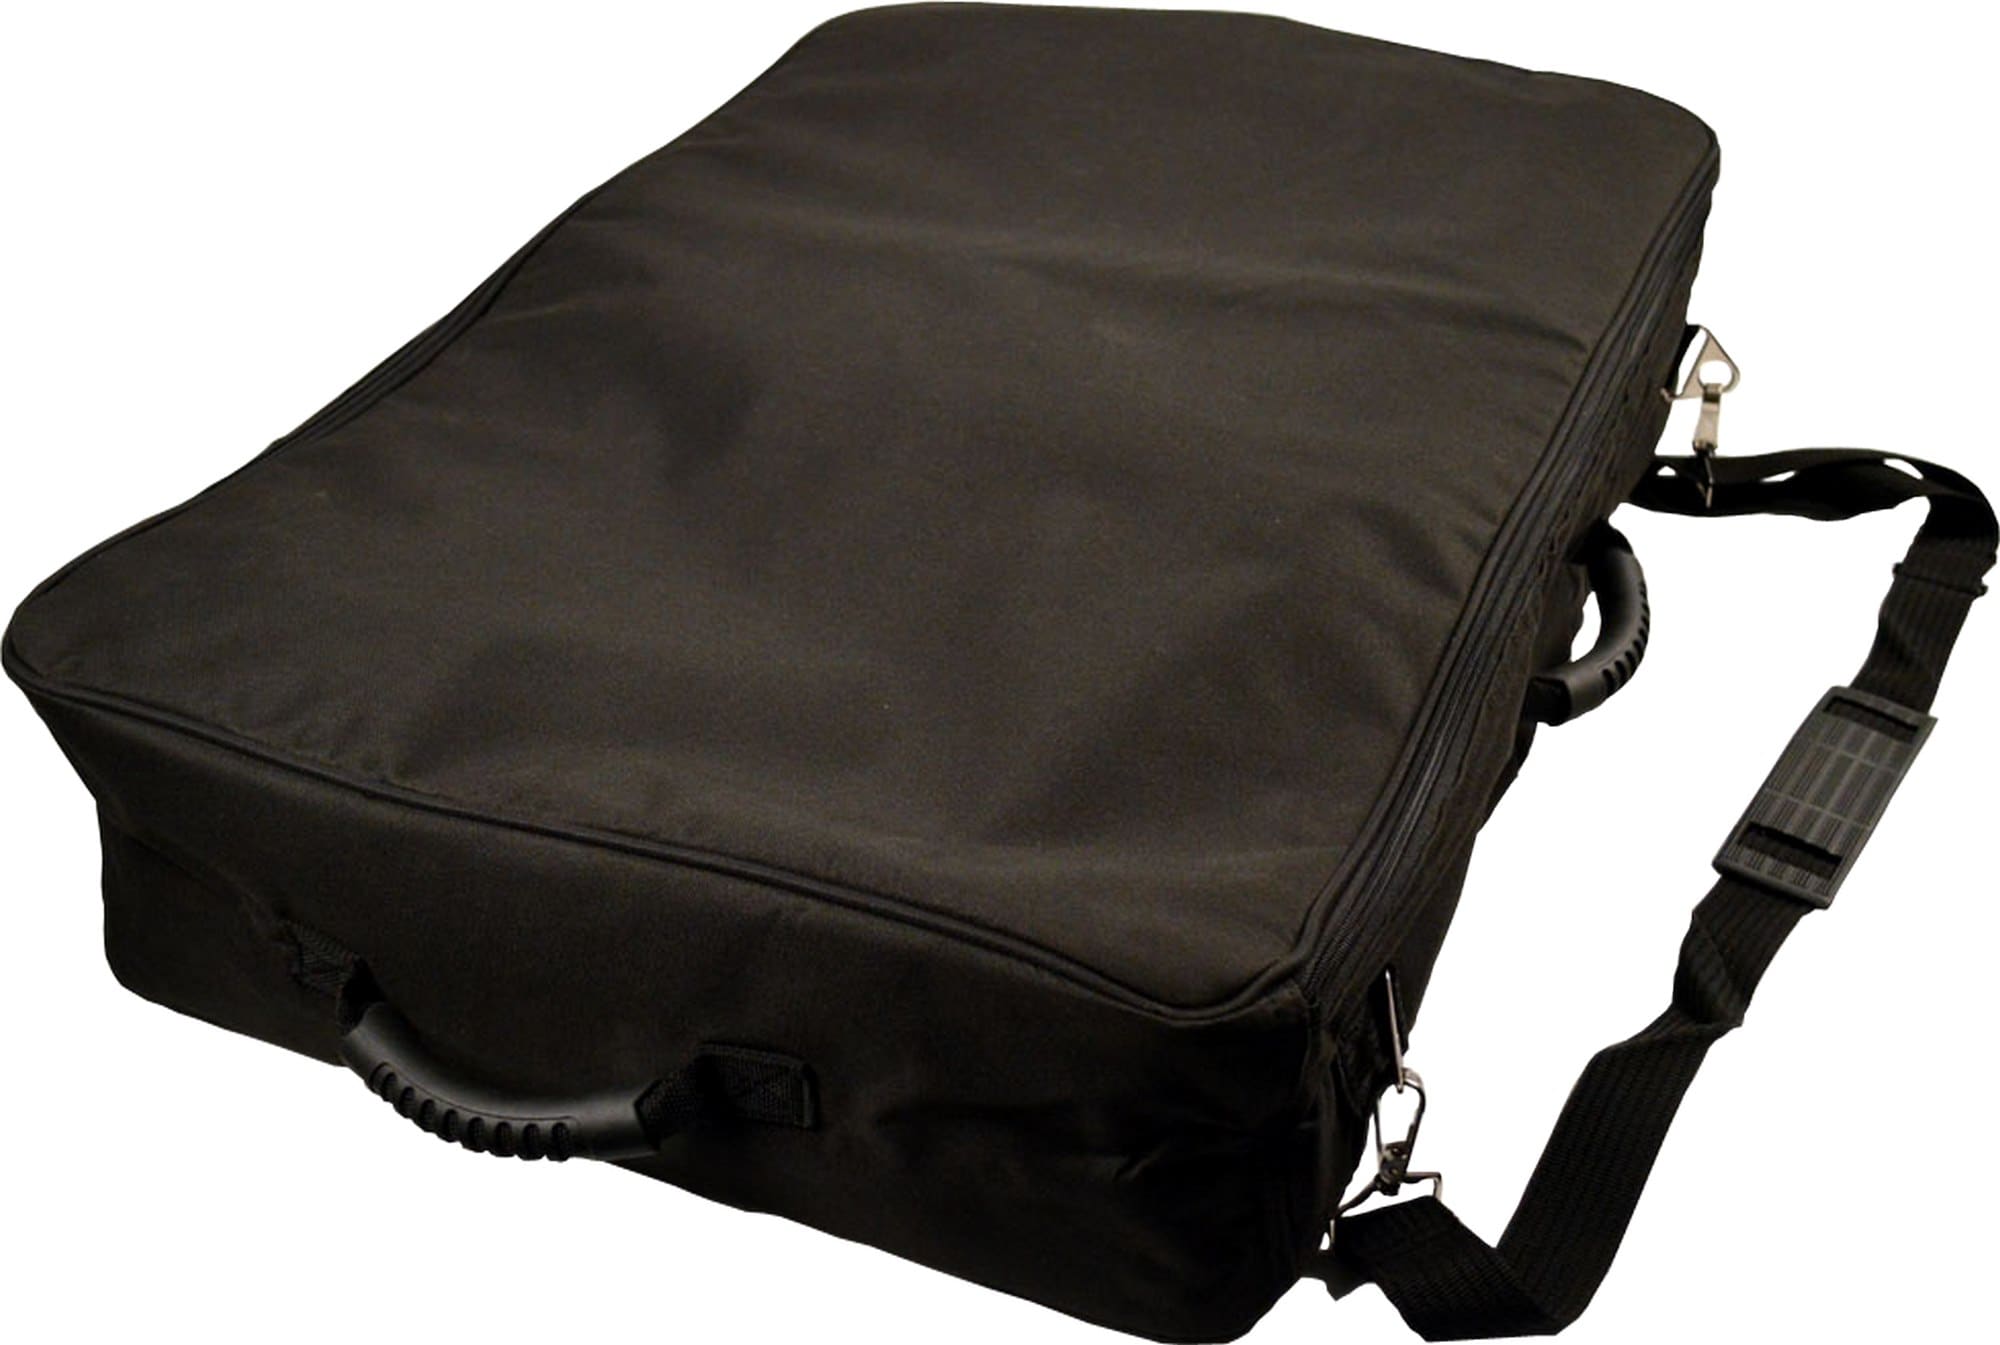 Carry bag for the B-G pit trolley